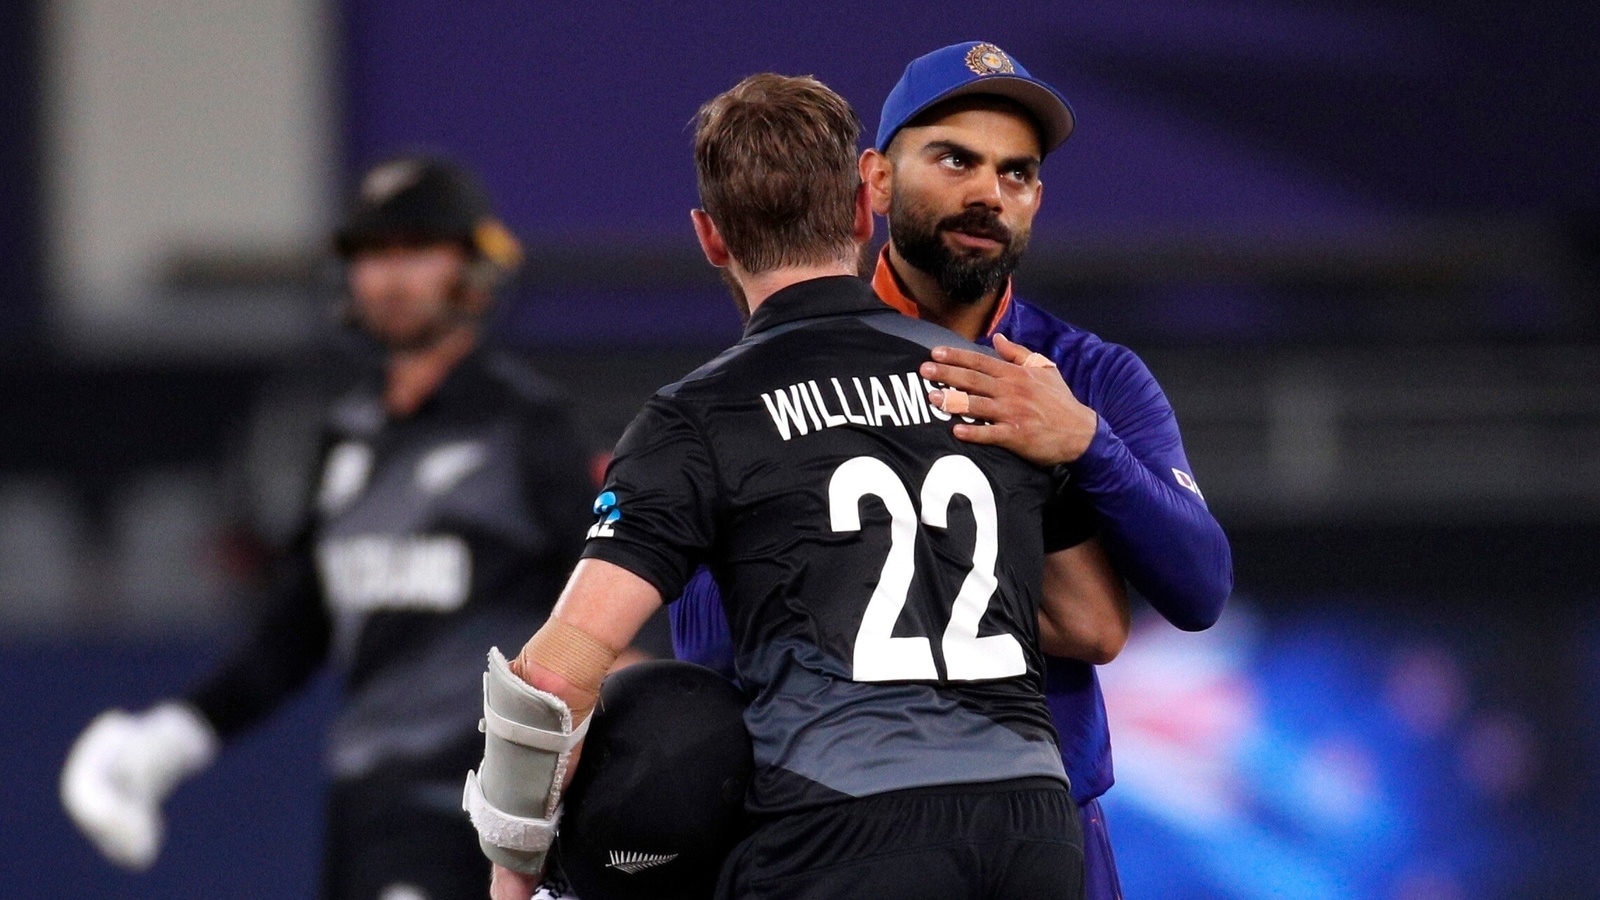 IND vs NZ Highlights, T20 World Cup 2021 New Zealand beat India by 8 wickets; Boult, Mitchell, and Sodhi shine in Dubai Hindustan Times